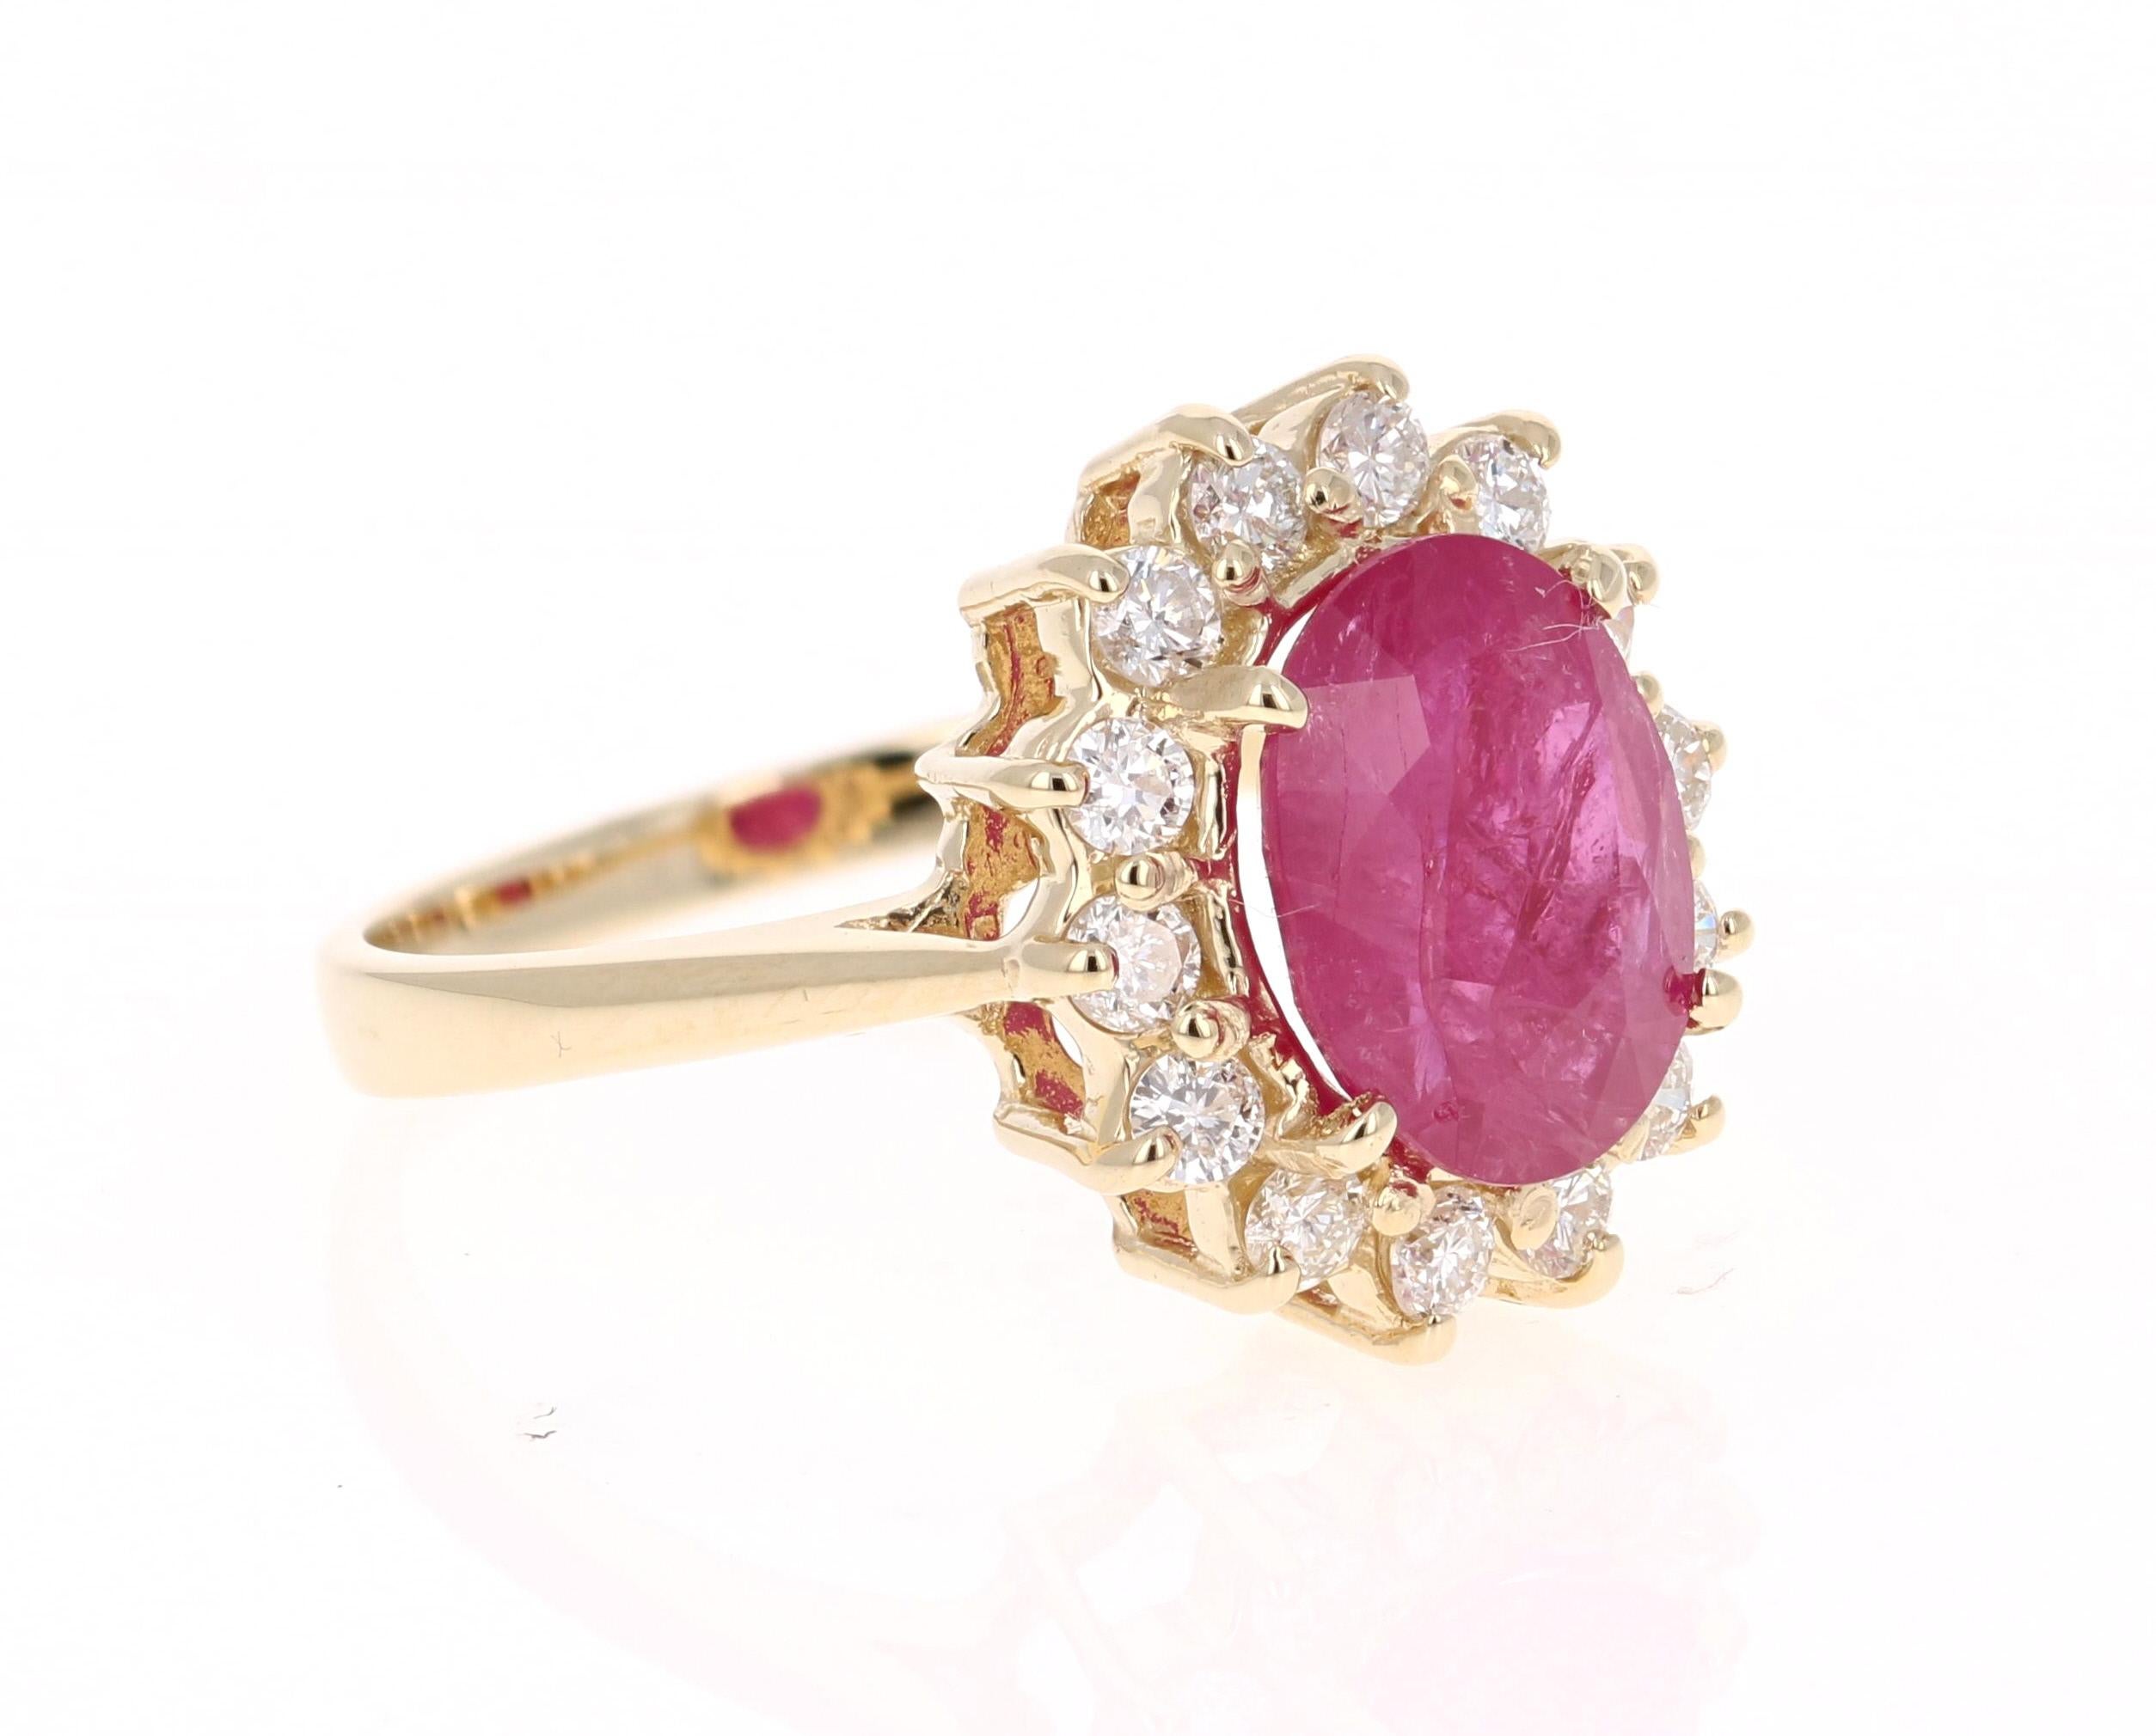 Simply beautiful Ballerina Ruby Diamond Ring with a Oval Cut 3.27 Carat Ruby which is surrounded by 14 Round Cut Diamonds that weigh 0.55 carats. The total carat weight of the ring is 3.82 carats. The clarity and color of the diamonds are SI-F. The